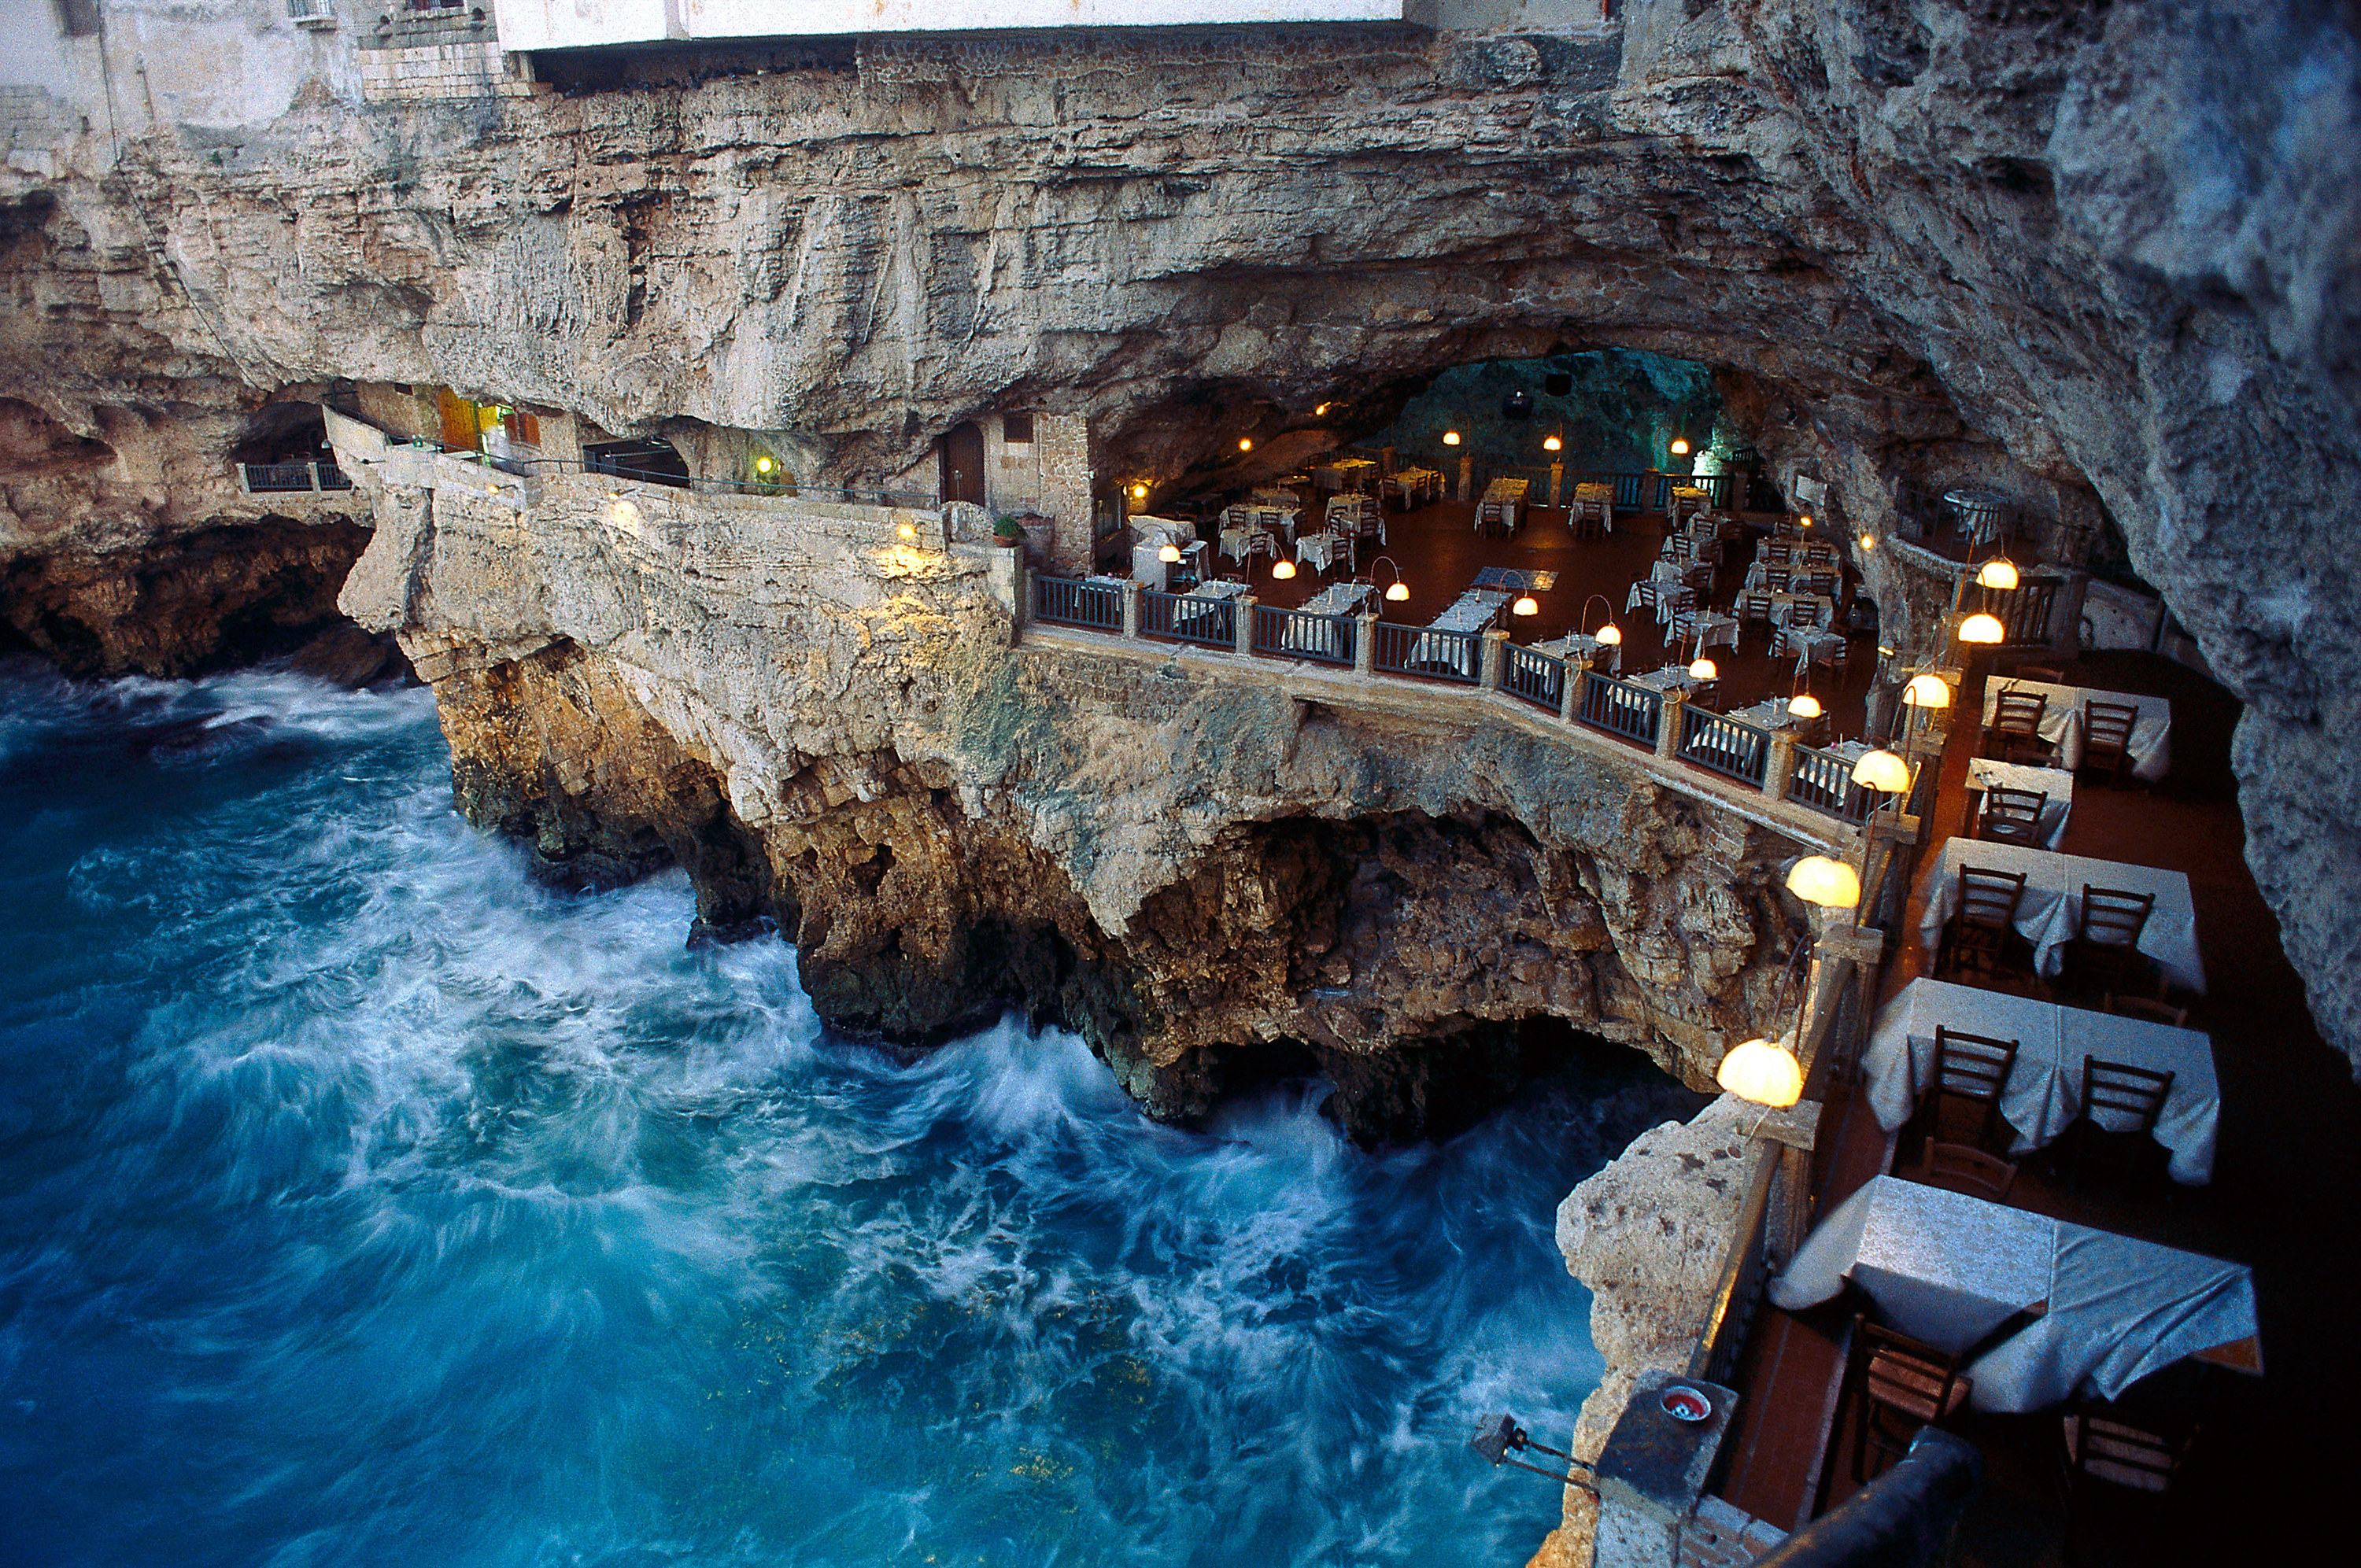 Restaurant built into a cave over the ocean